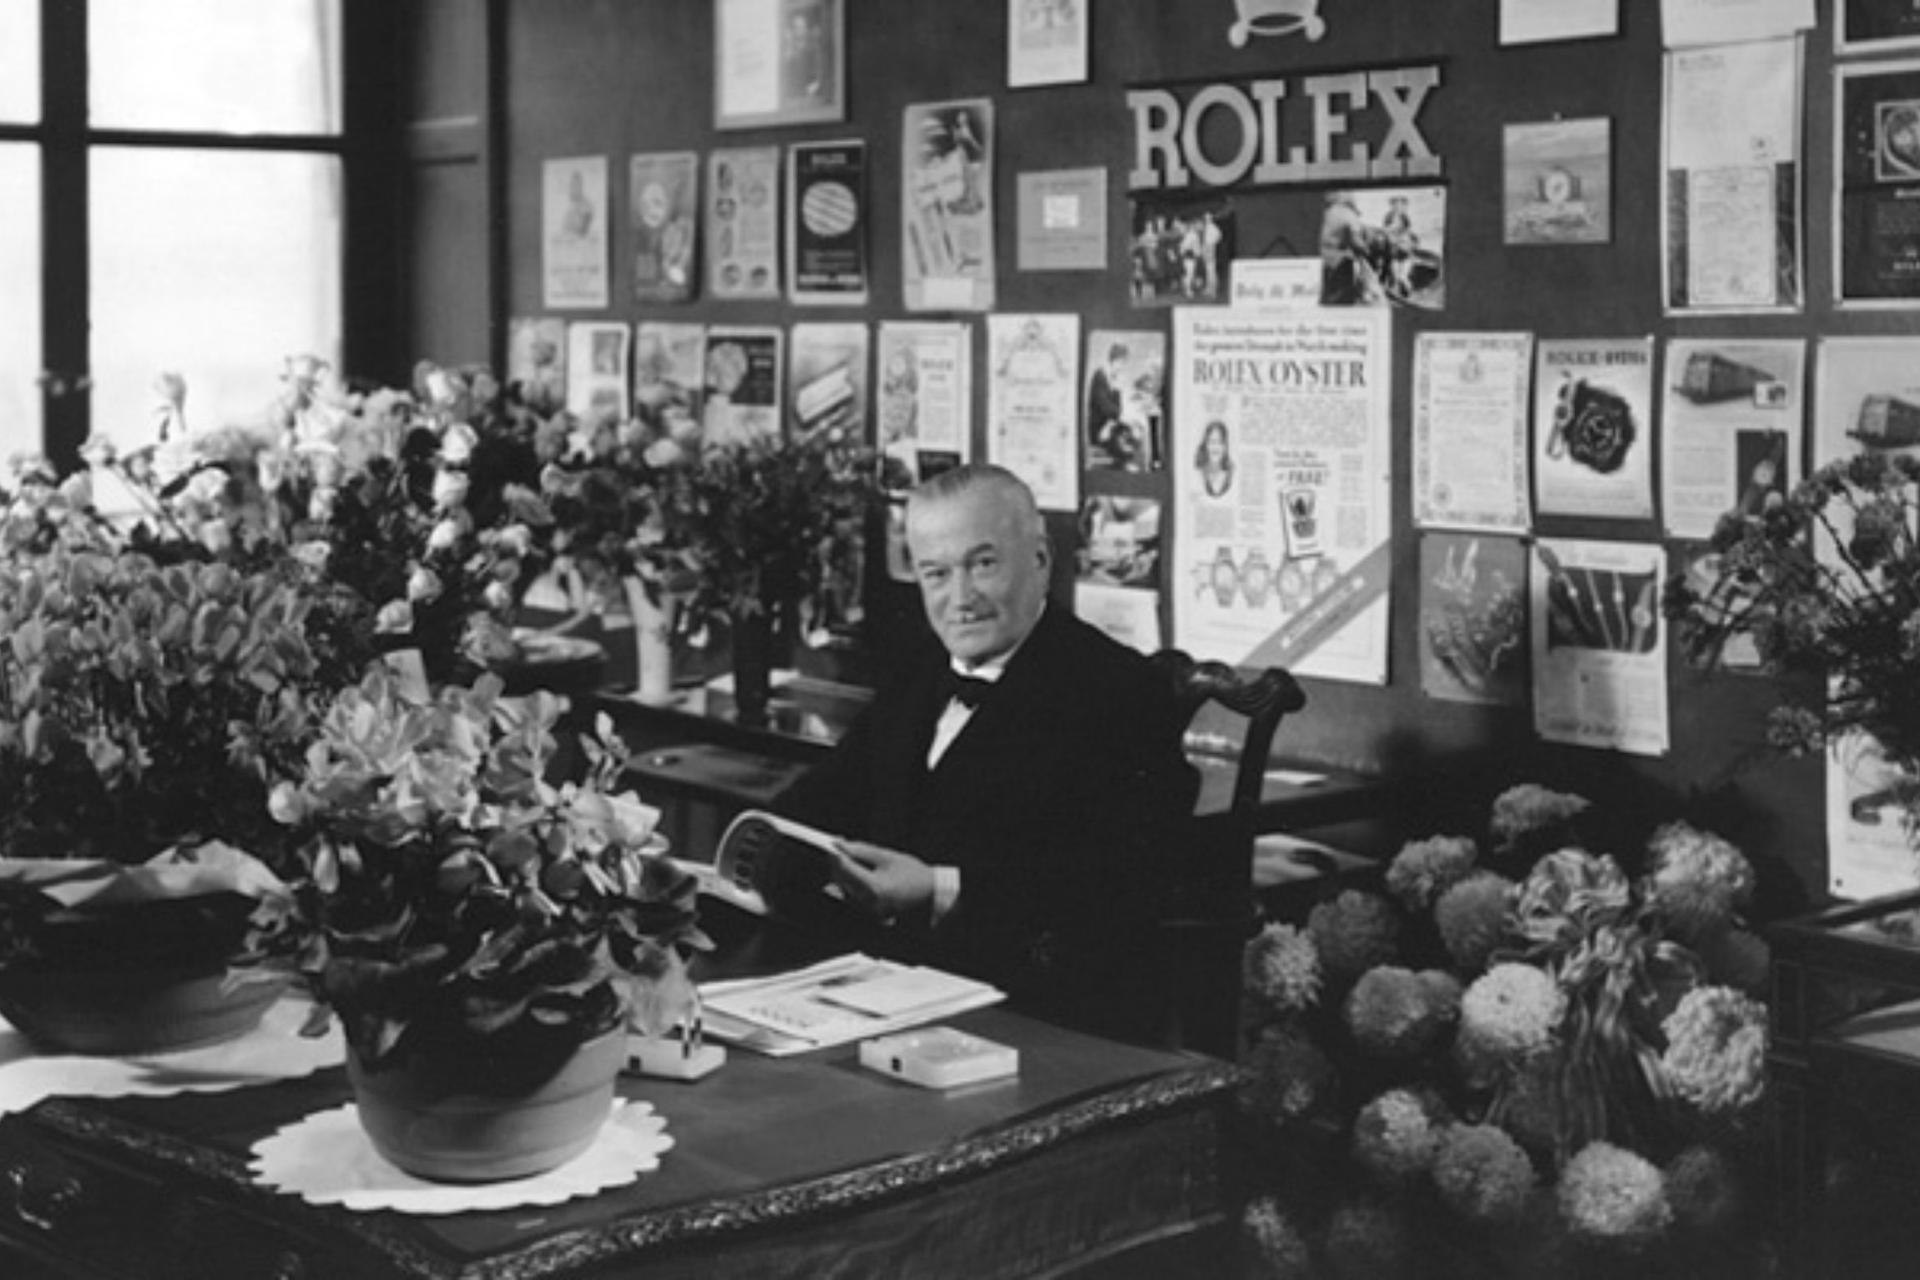 In the early 1900s, Hans Wilsdorf, the founder of Rolex, established a watch distribution company in London Photo: Rolex